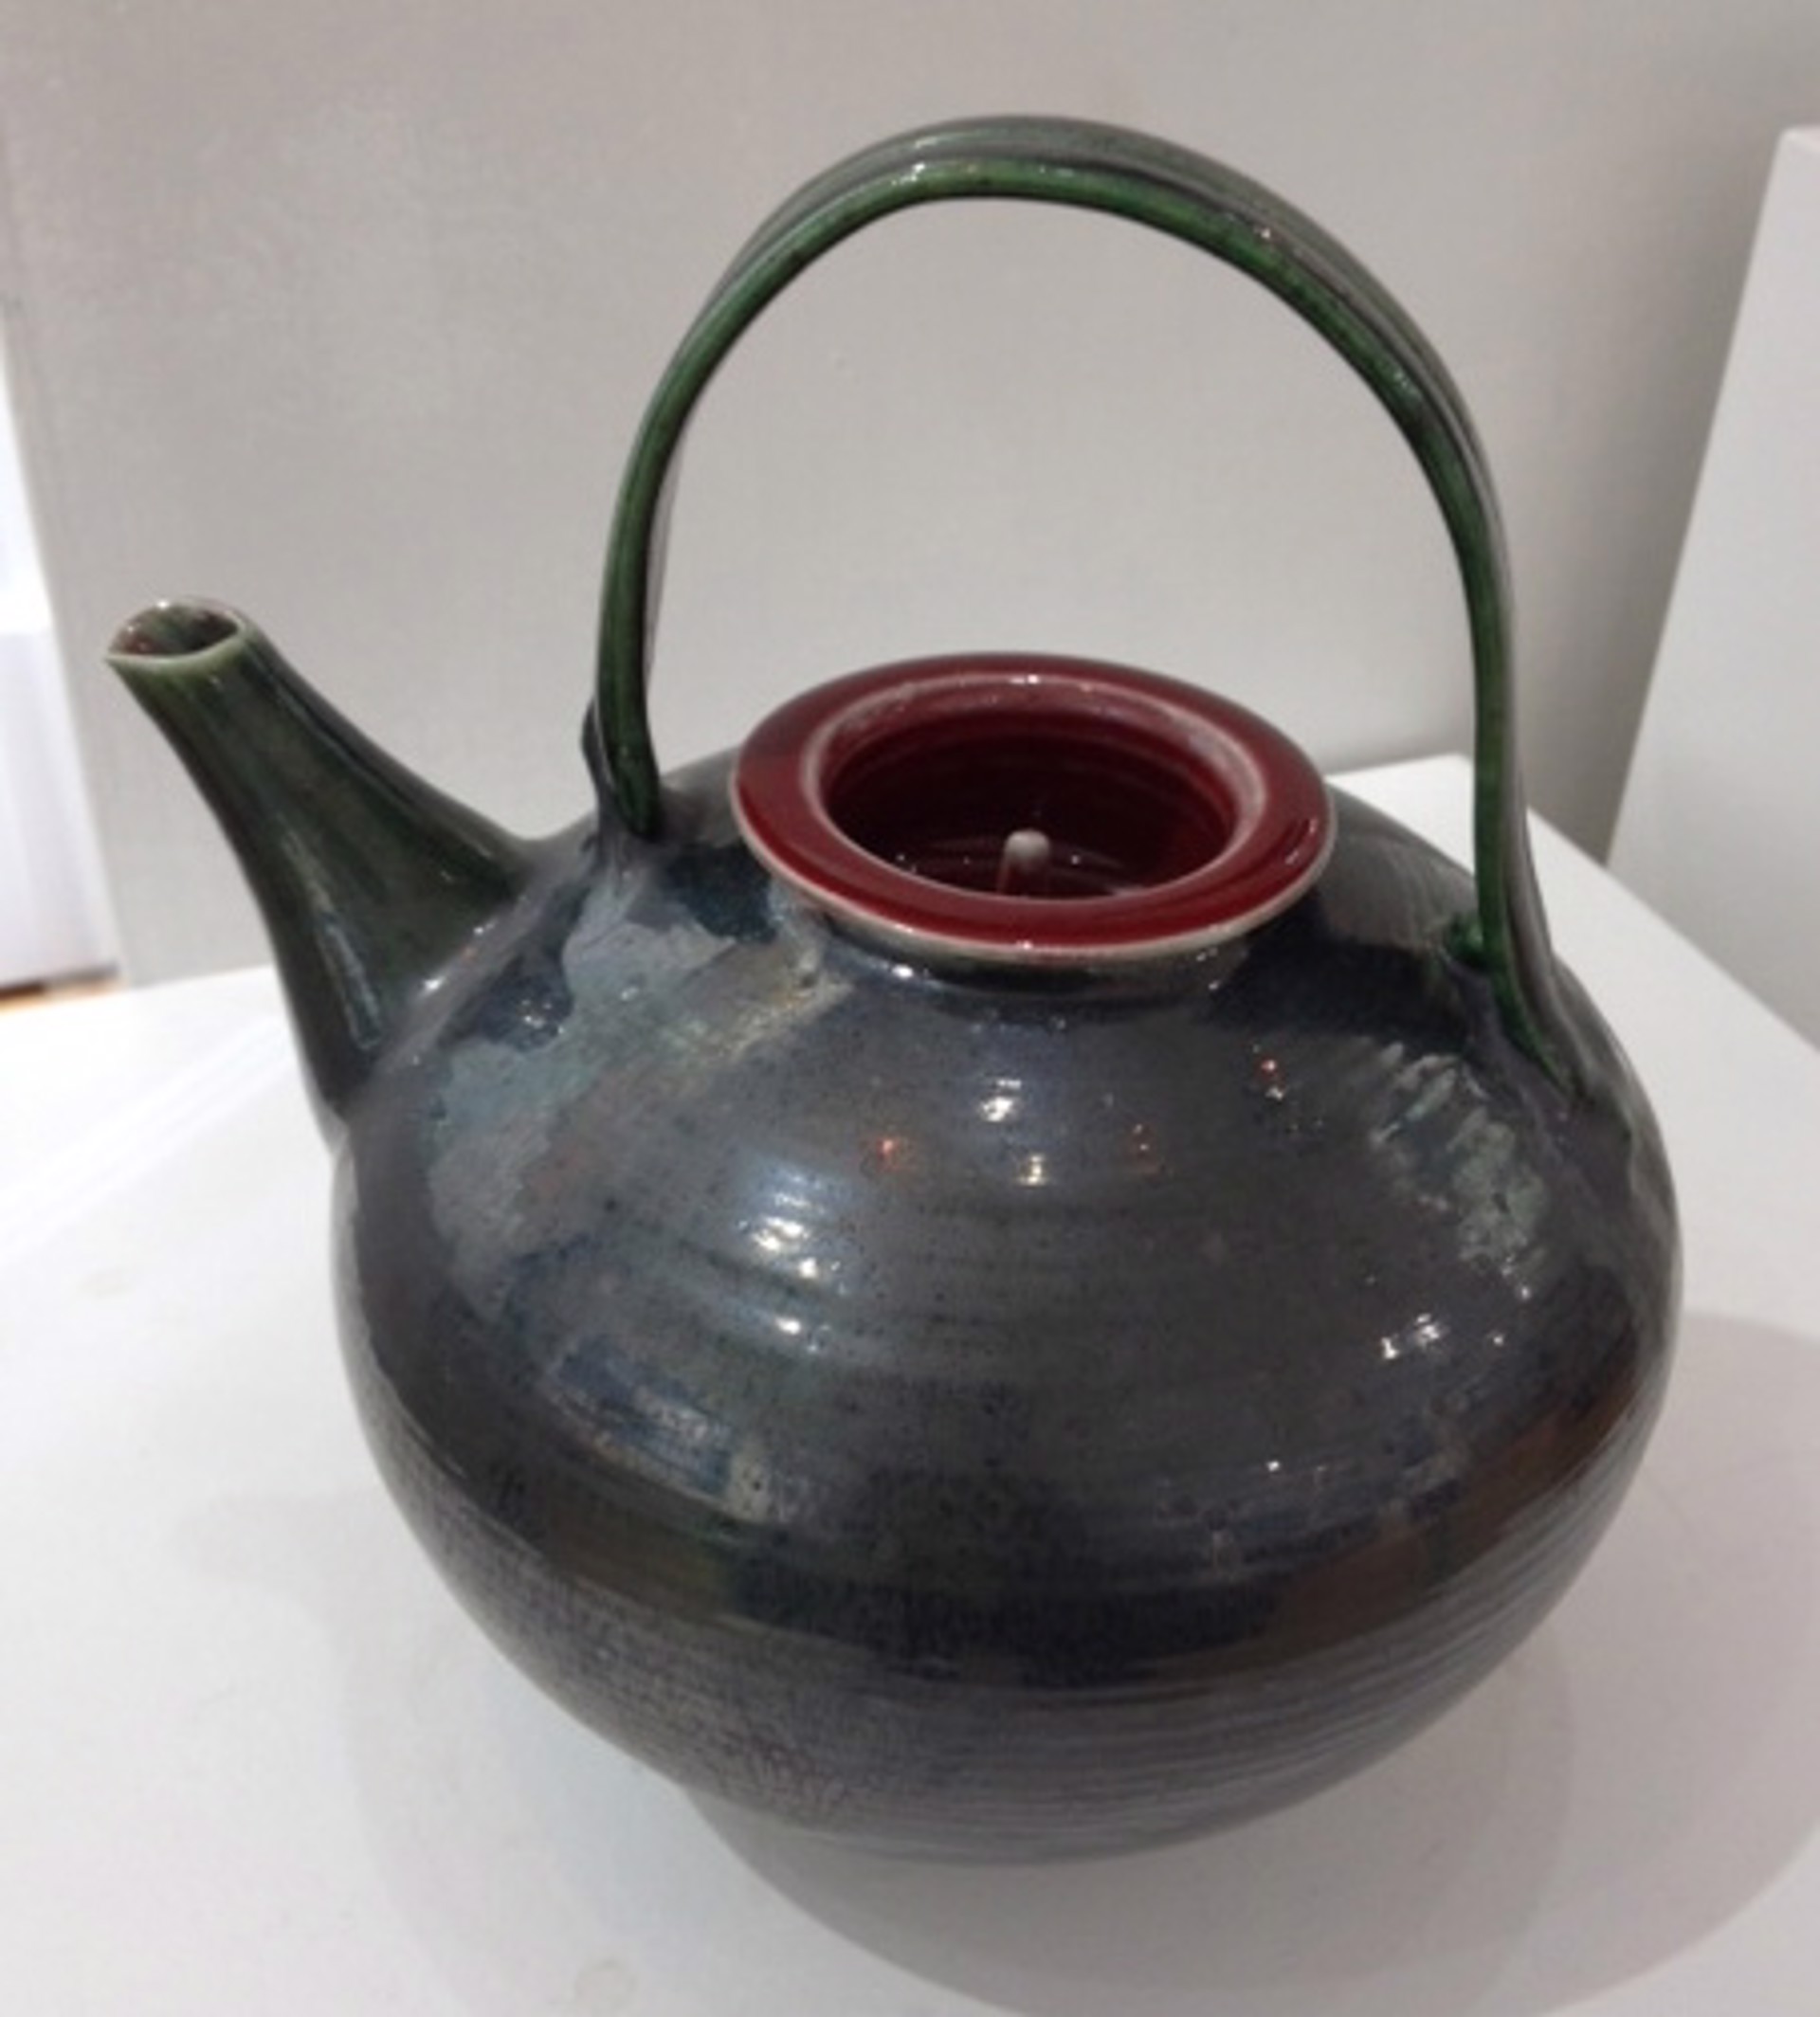 Tea Pot - Black and Green with Red Top by Kayo O'Young